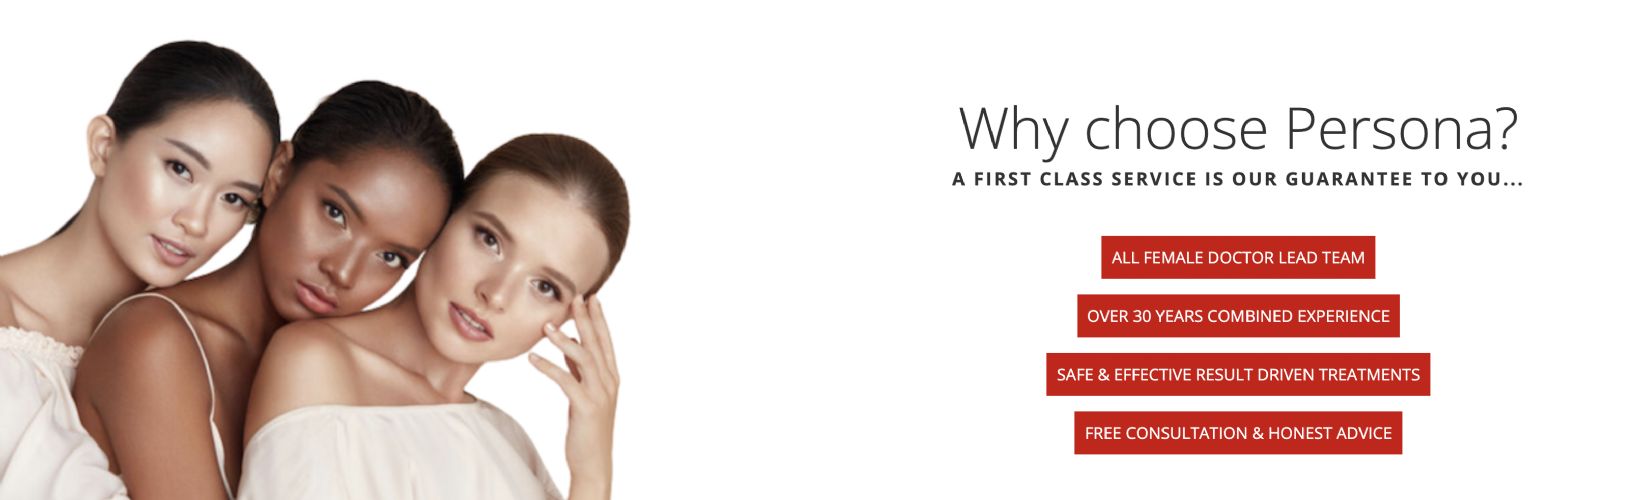 Persona Medical Aesthetics Skin and Laser Clinic Banner